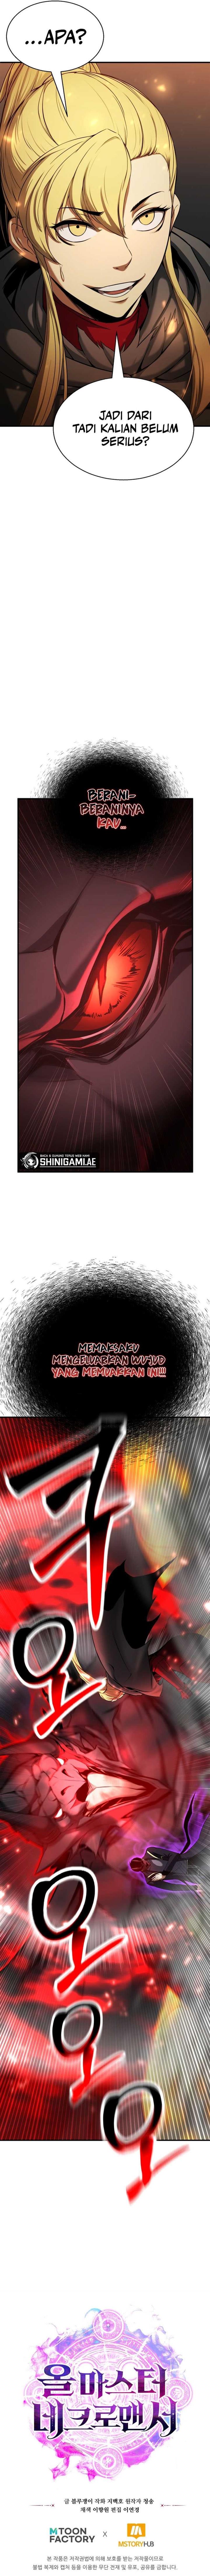 Absolute Necromancer Chapter 44